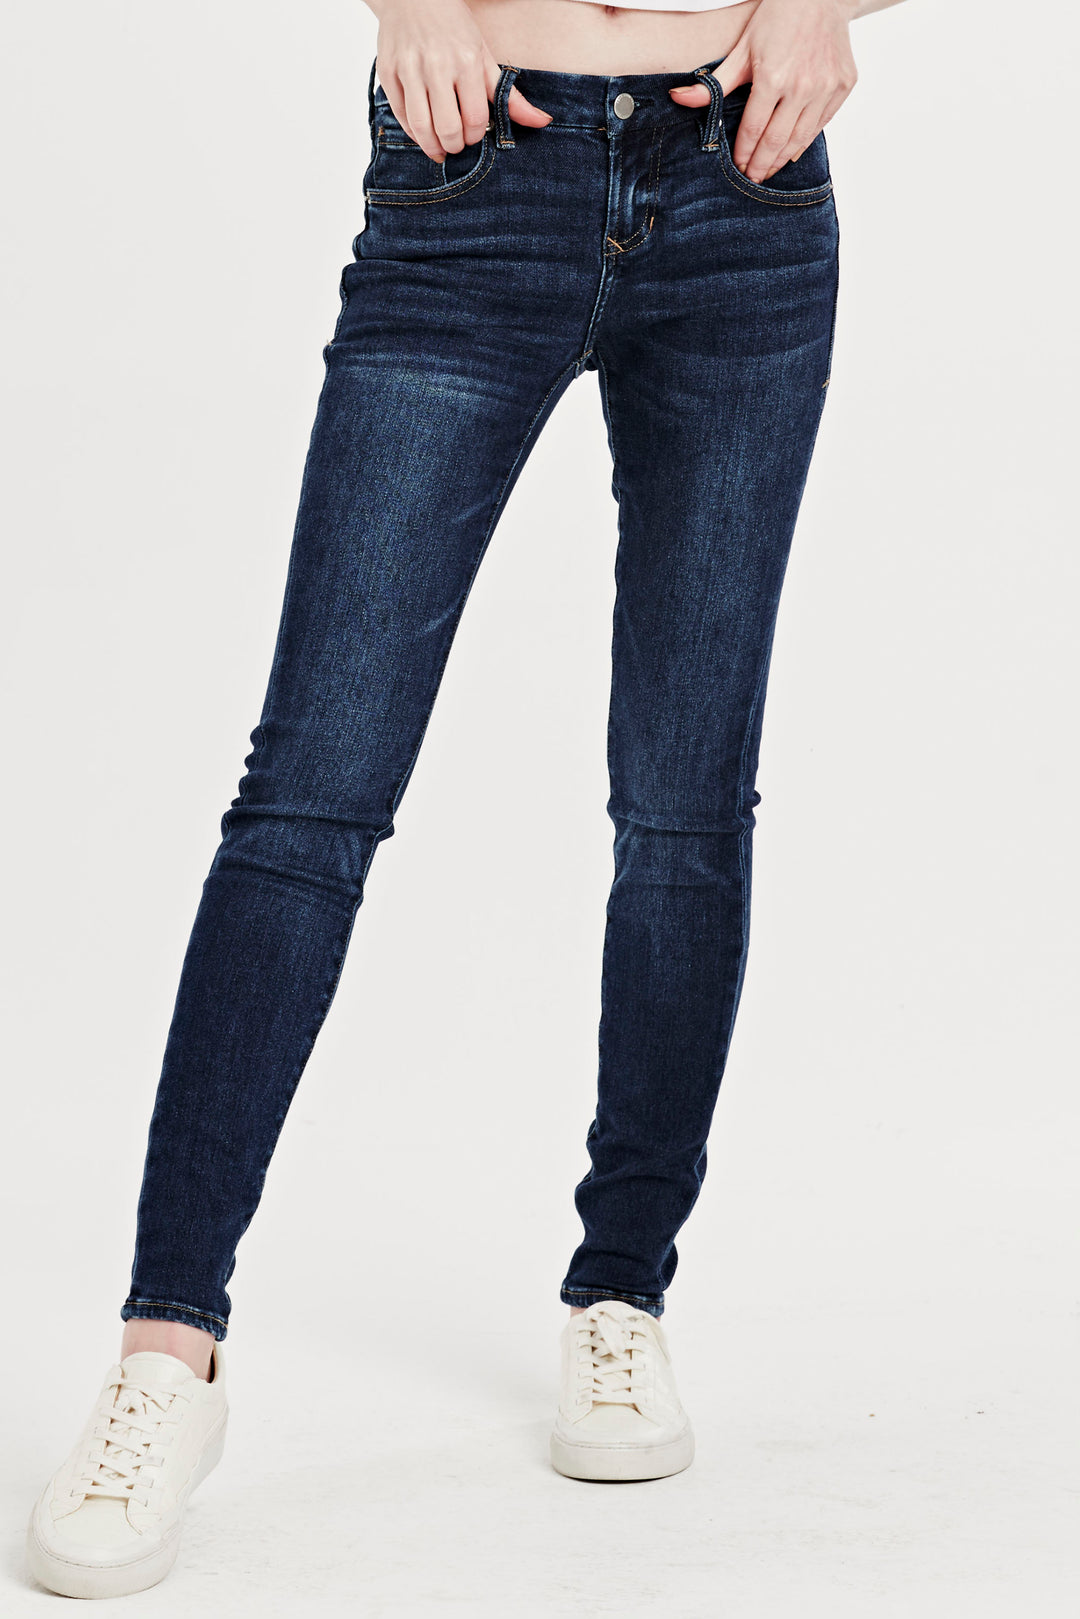 image of a female model wearing a joyrich mid rise skinny jeans mullholland JEANS